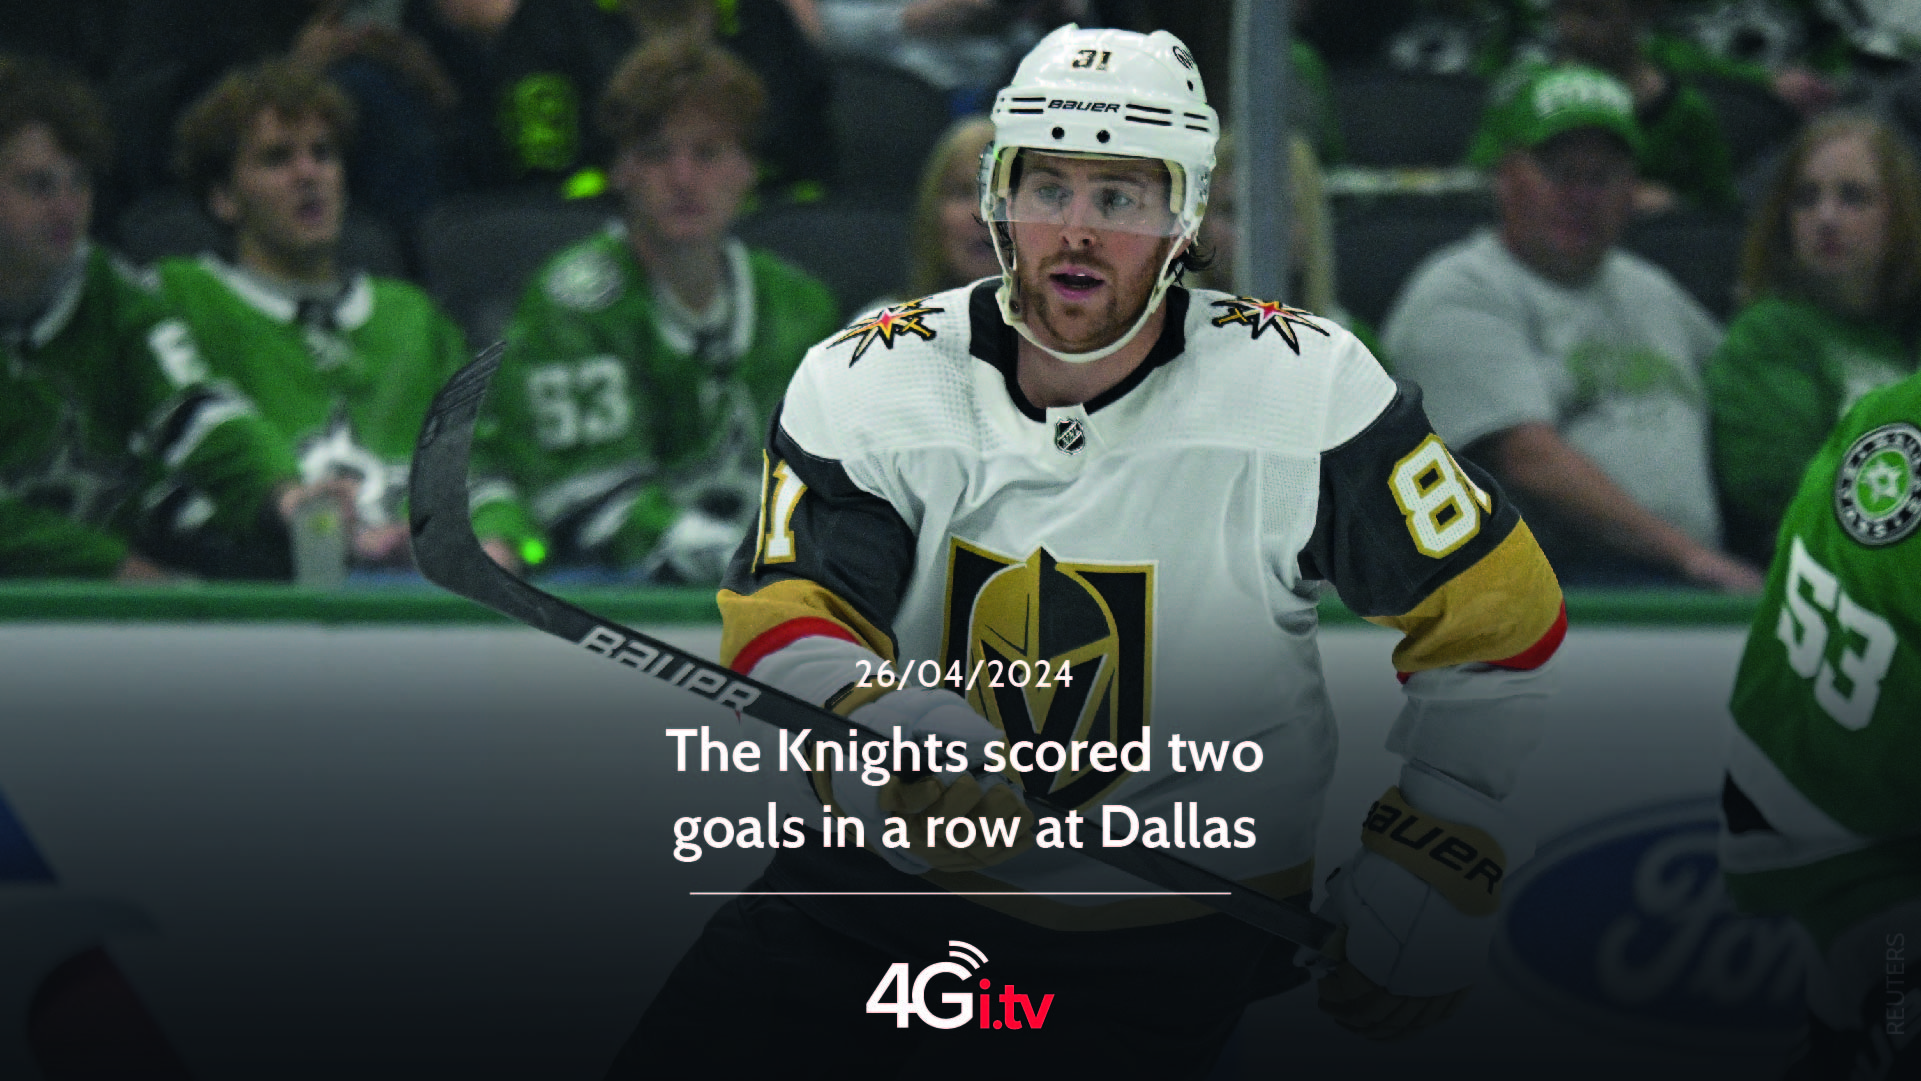 Подробнее о статье The Knights scored two goals in a row at Dallas